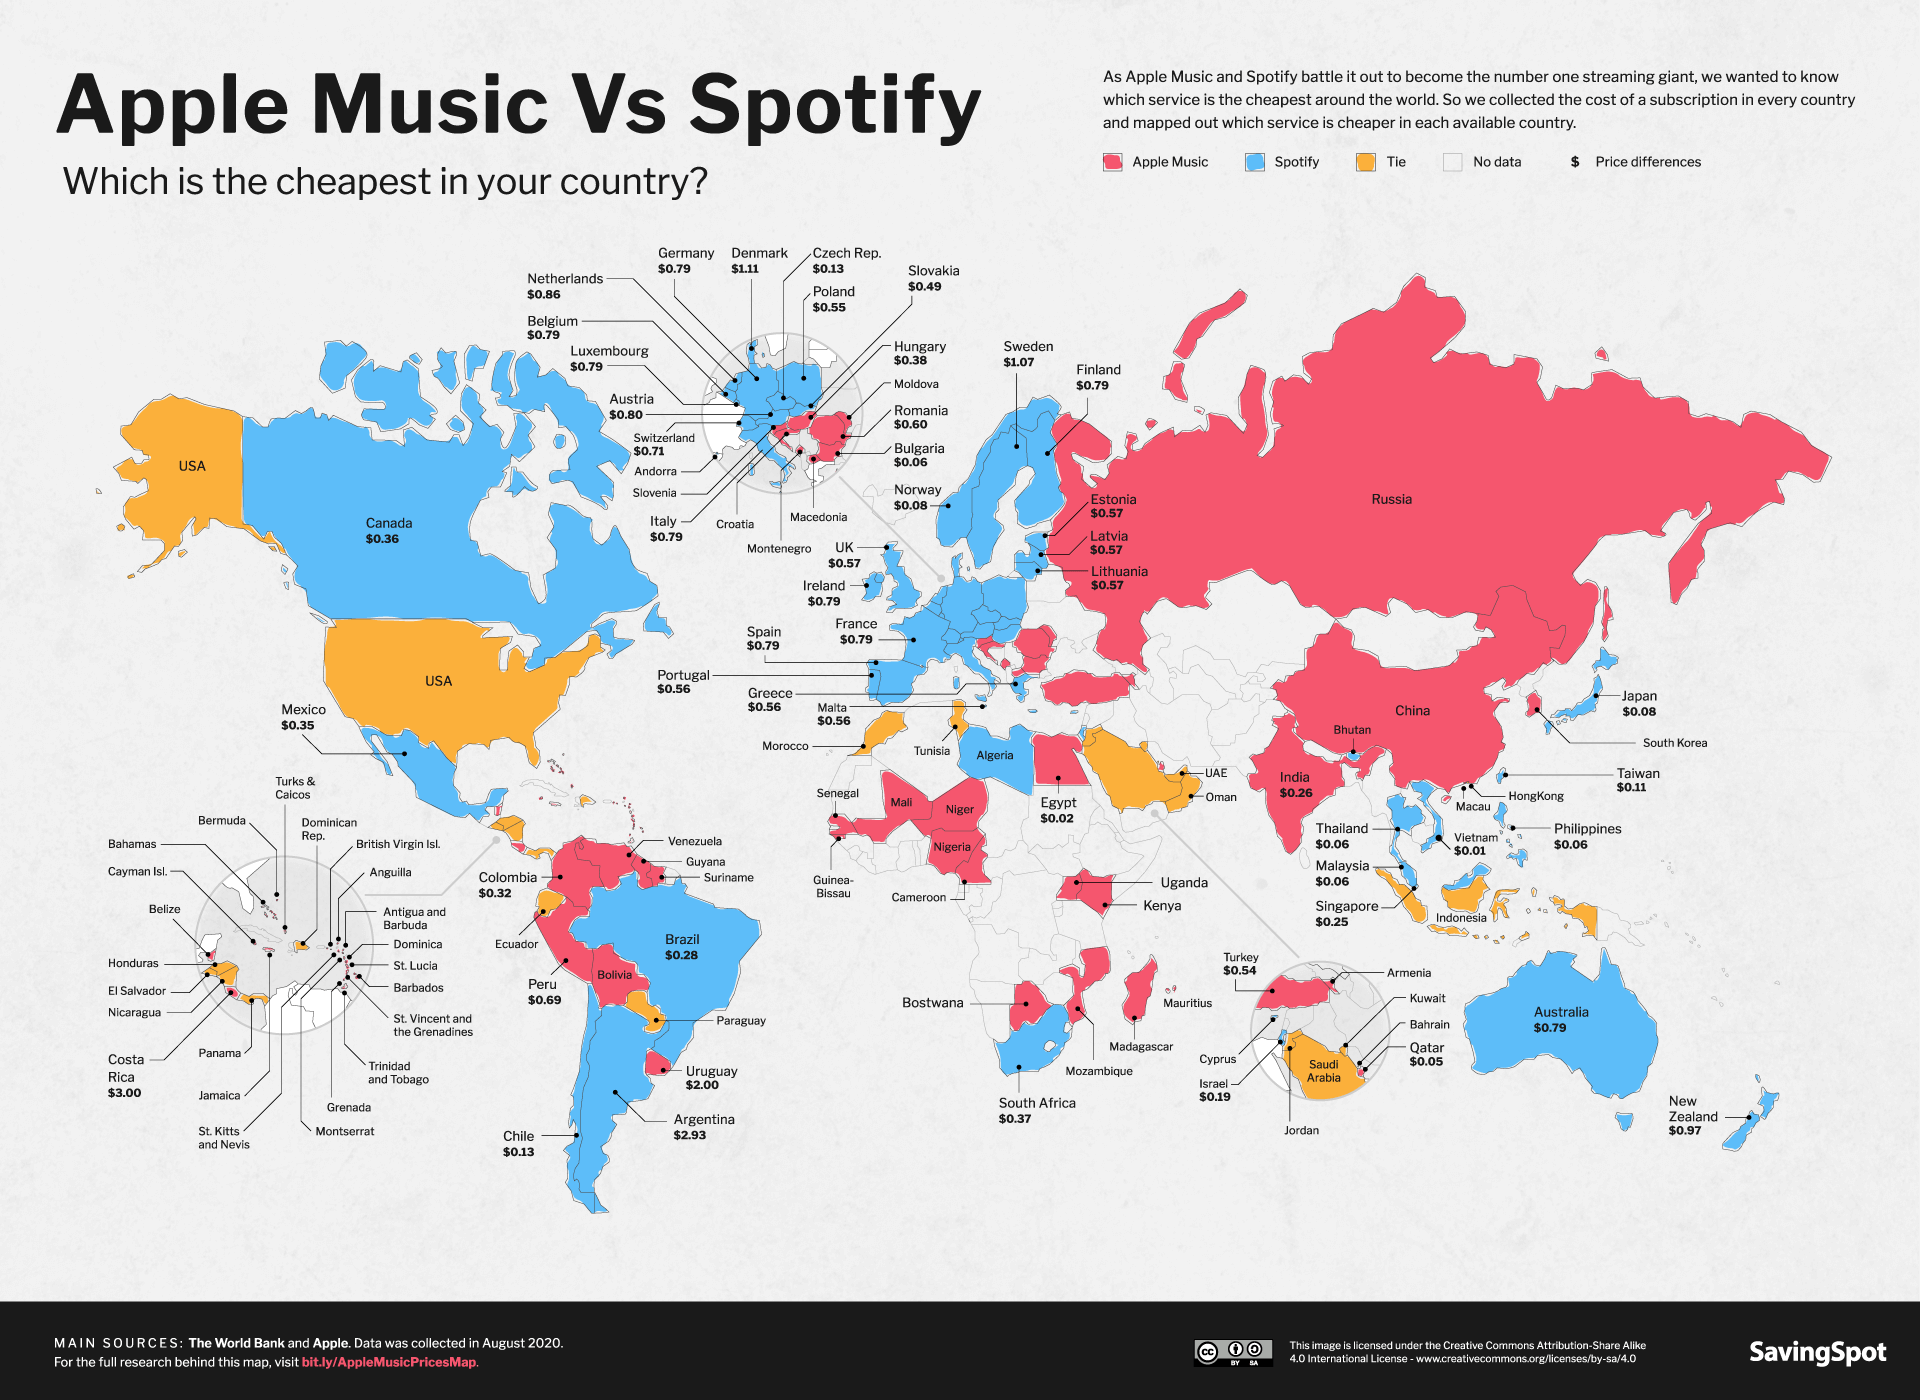 Is Apple Music or Spotify Cheaper Where You Live?